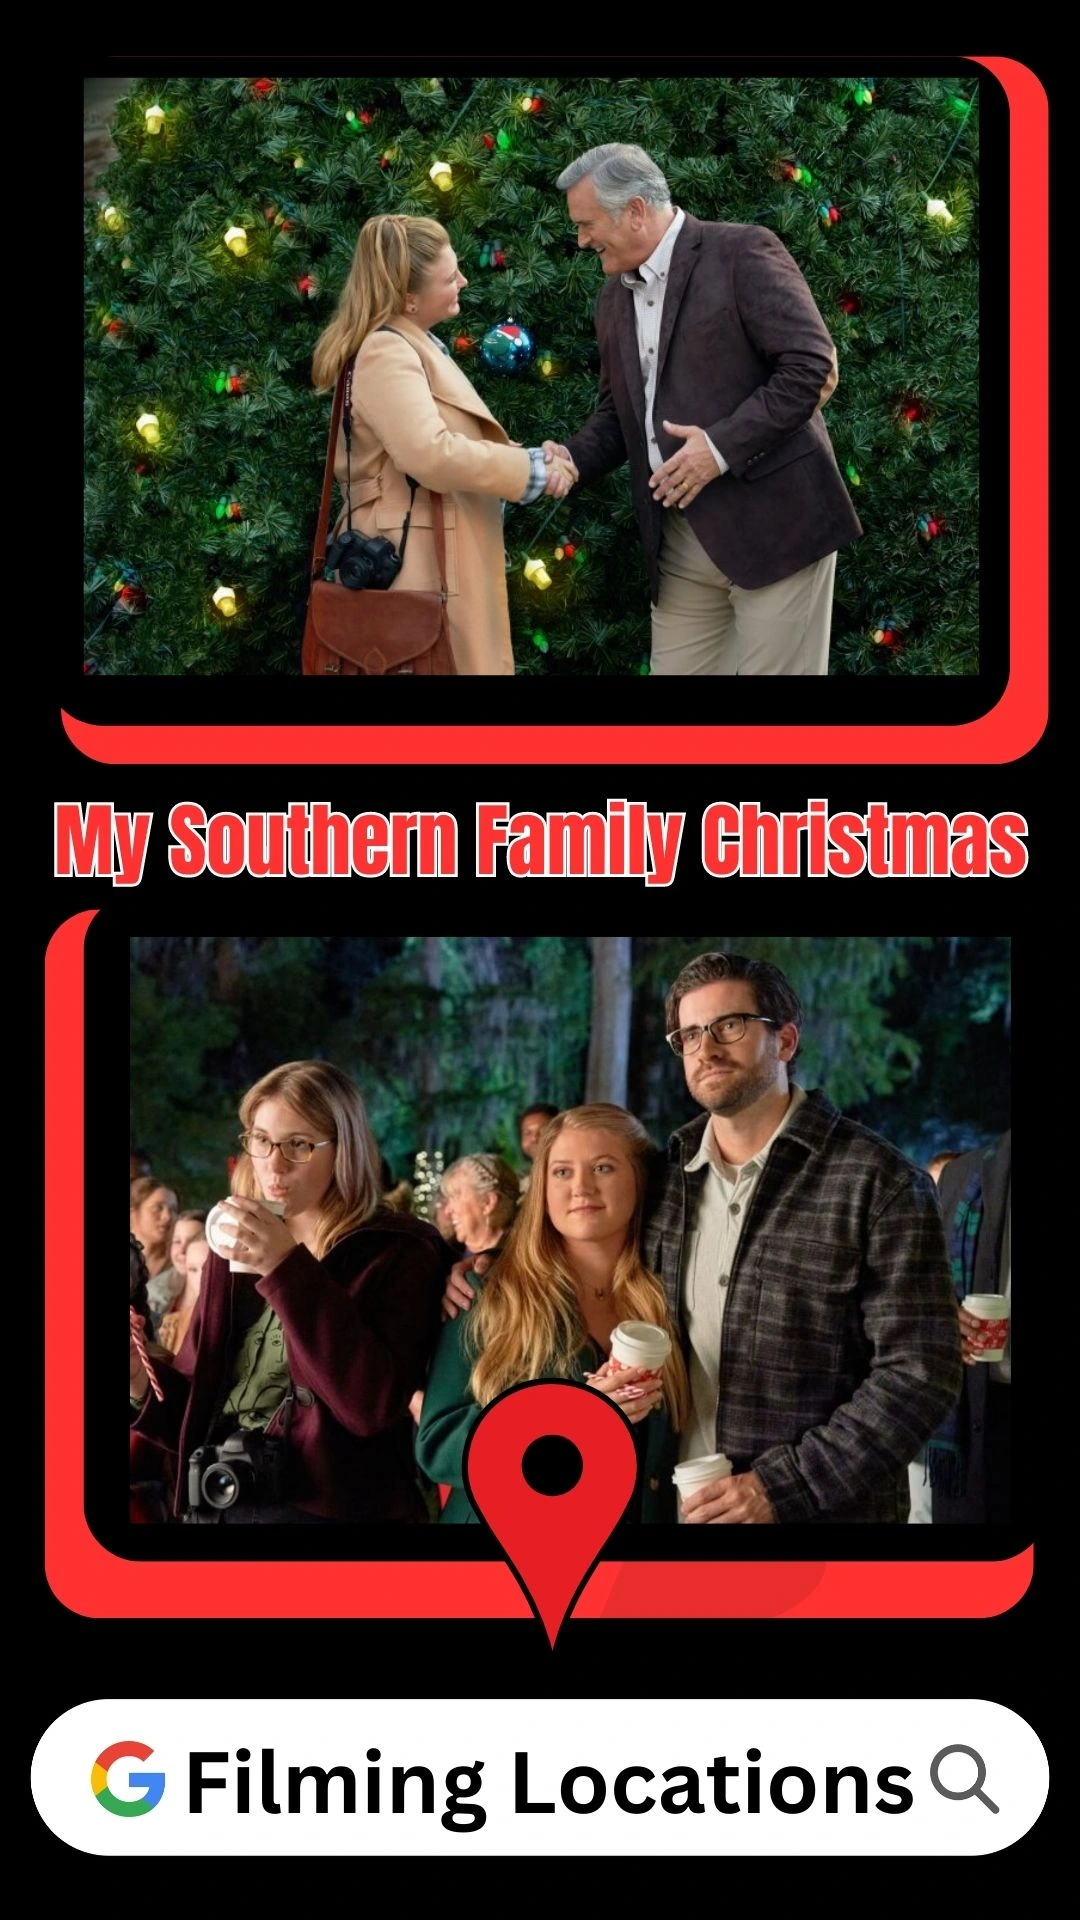 My Southern Family Christmas Filming Locations